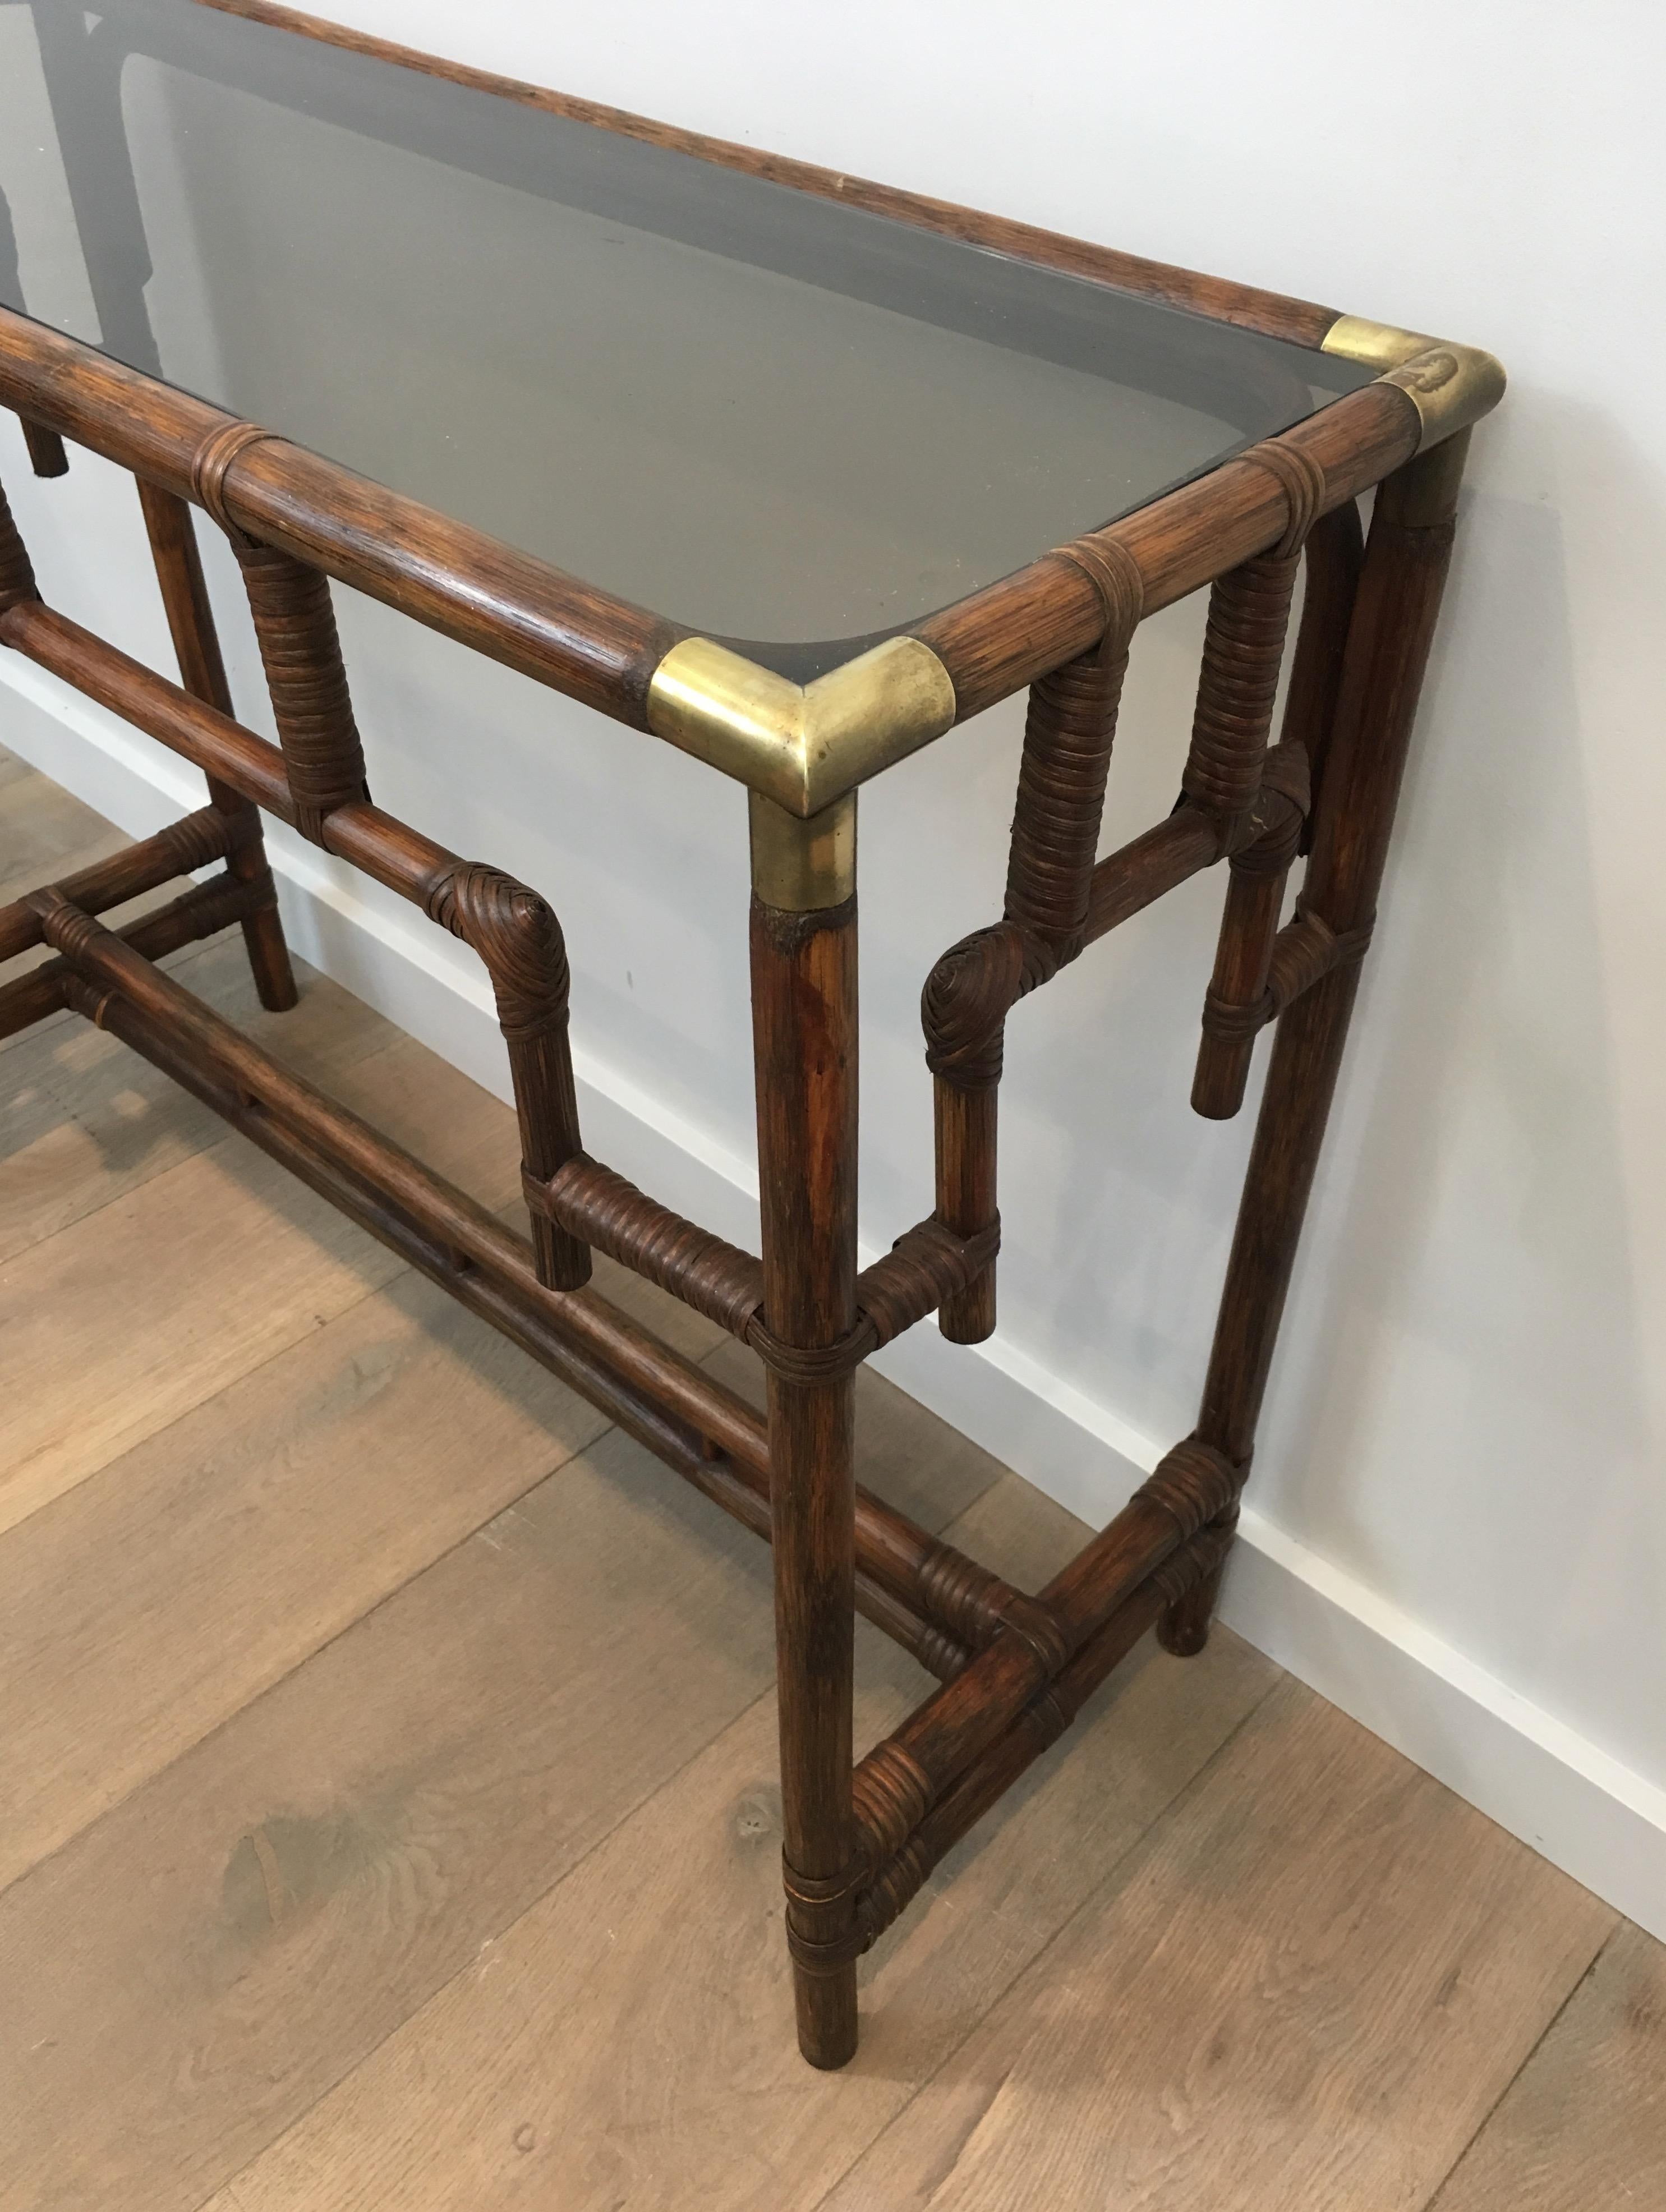 Late 20th Century Bamboo Console Table with Brass Corners and Smoked Glass Shelf, French